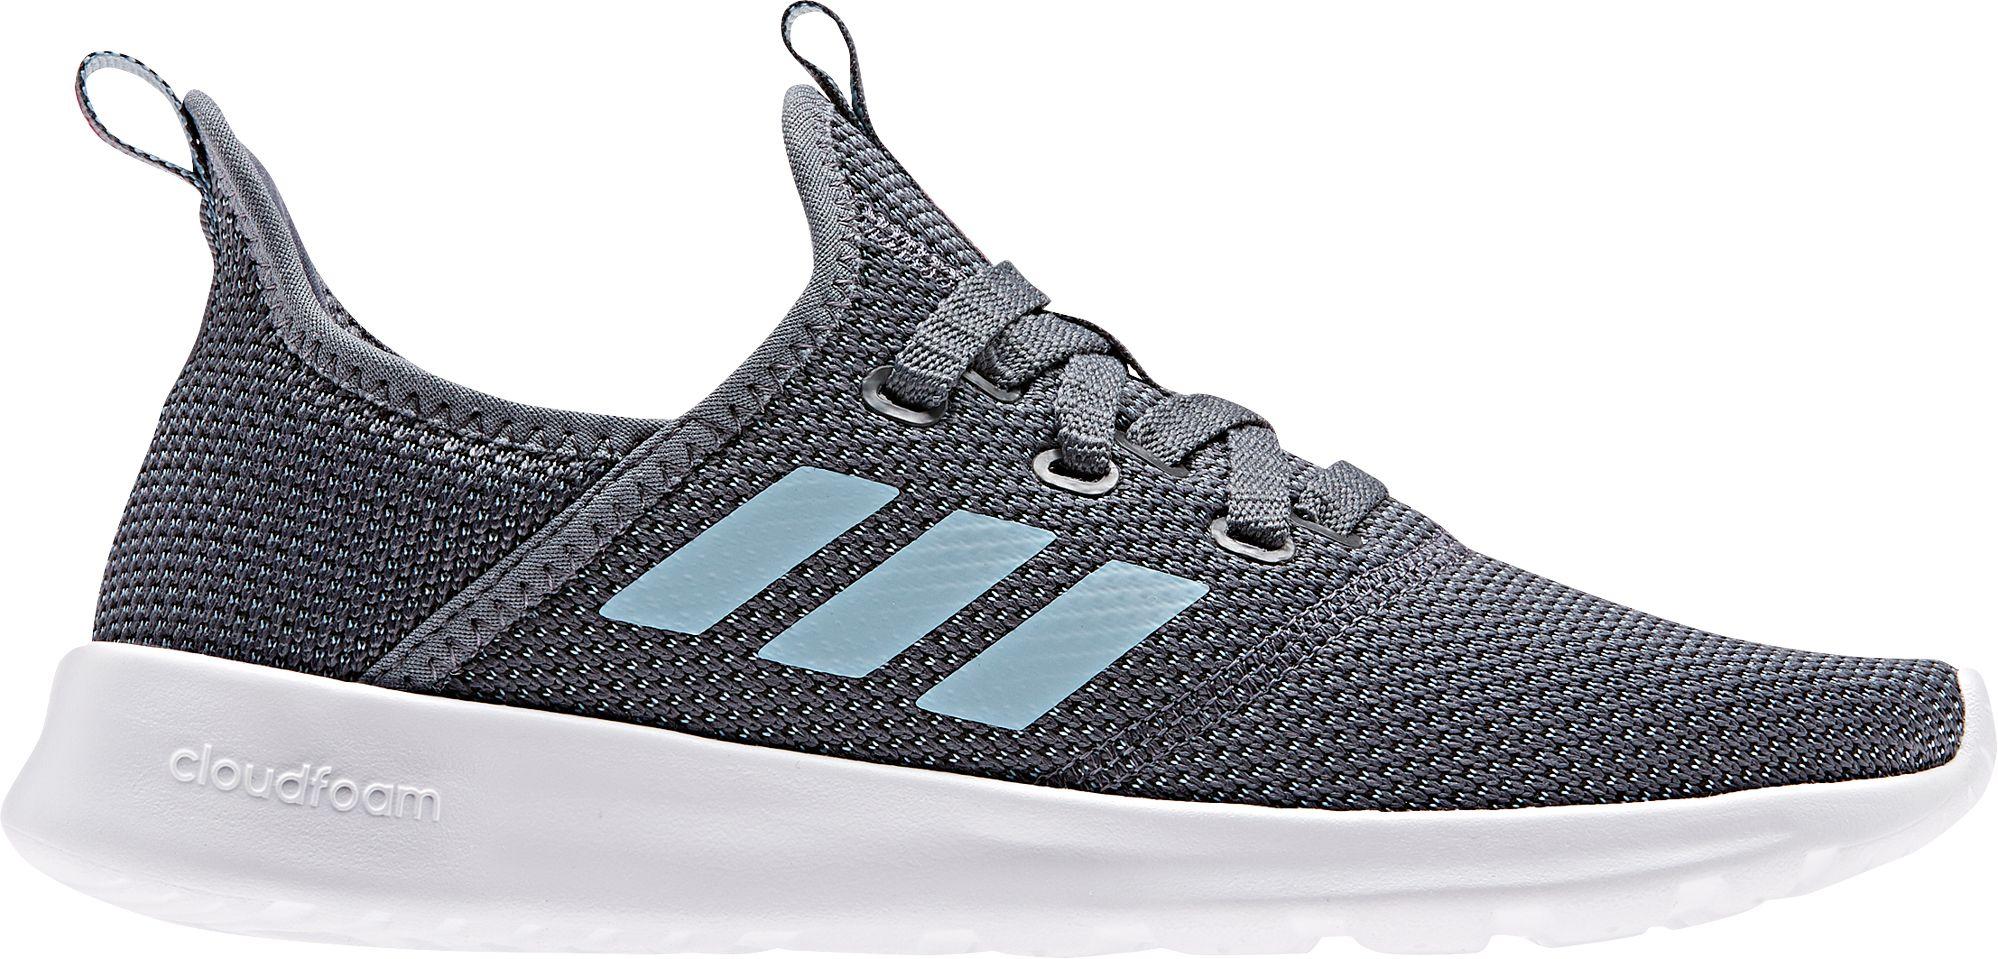 adidas Cloudfoam Pure Shoes in Teal/Blue/White (Blue) - Lyst